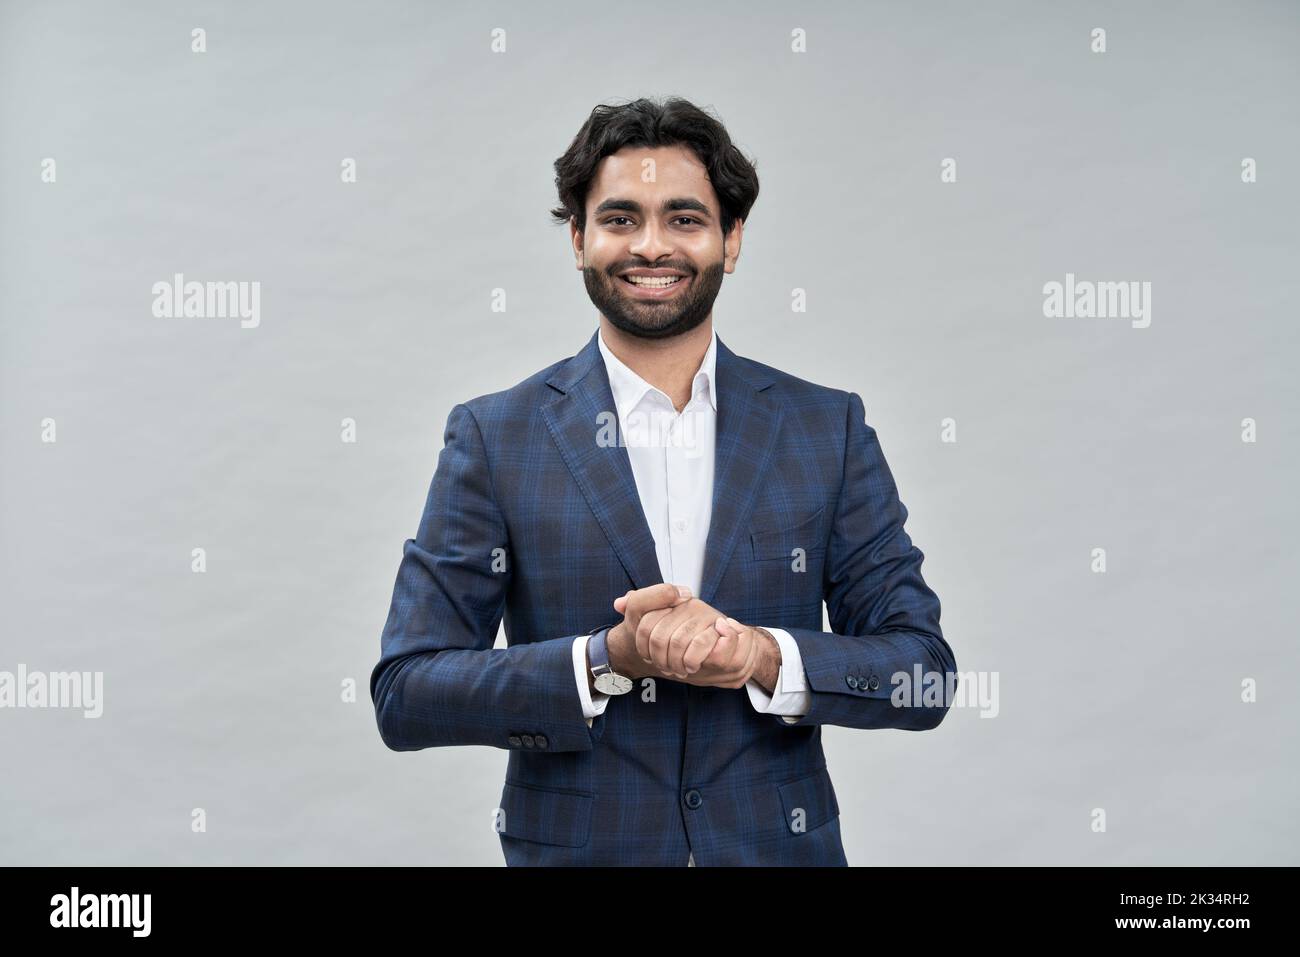 Smiling arab business man salesman wearing suit isolated on beige. Stock Photo